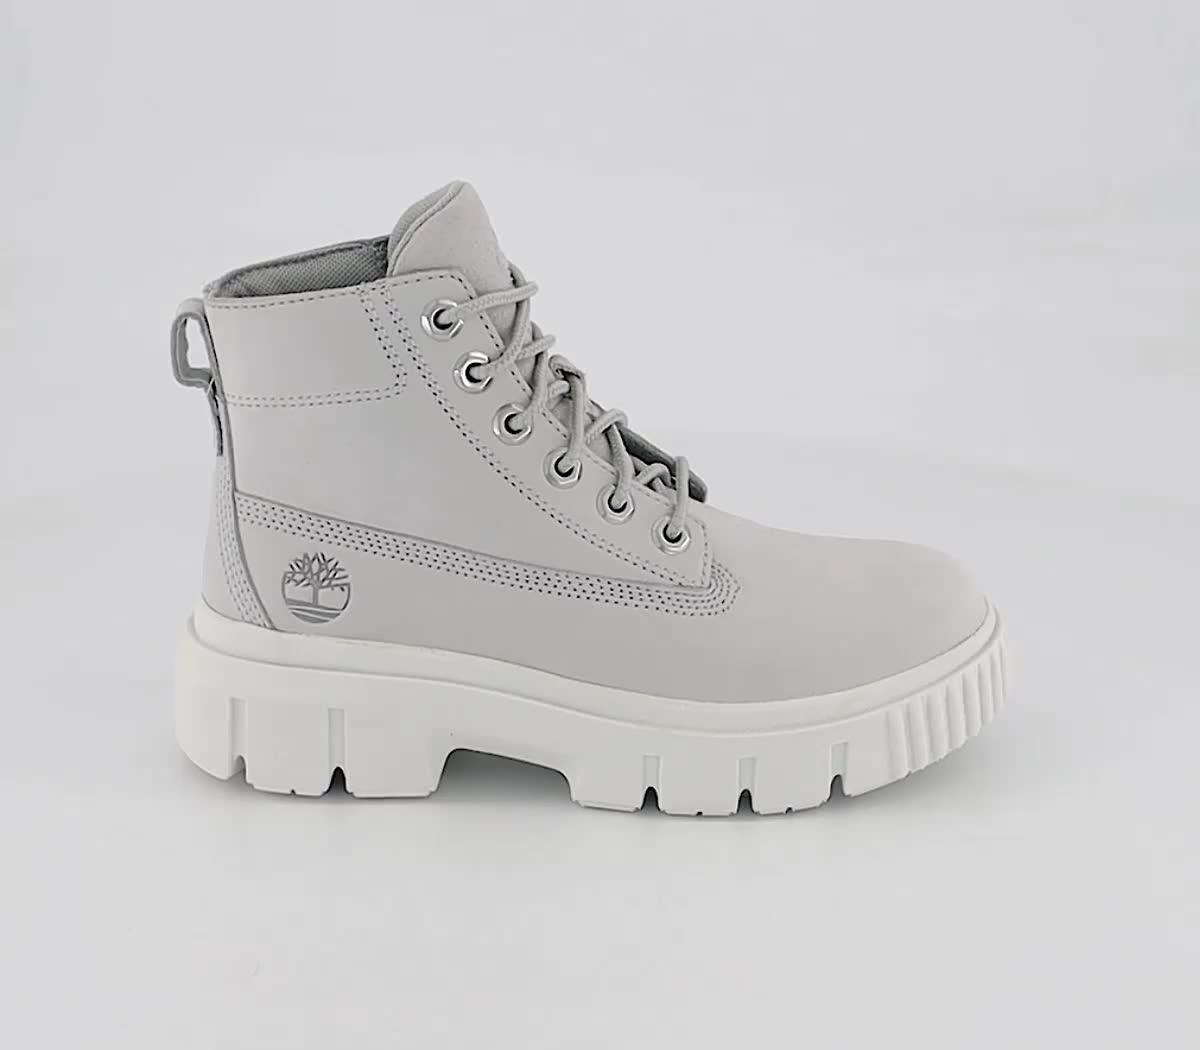 SIDA hacer los deberes Generosidad Timberland Greyfield Leather Boot Light Grey Nubuck - Women's Ankle Boots